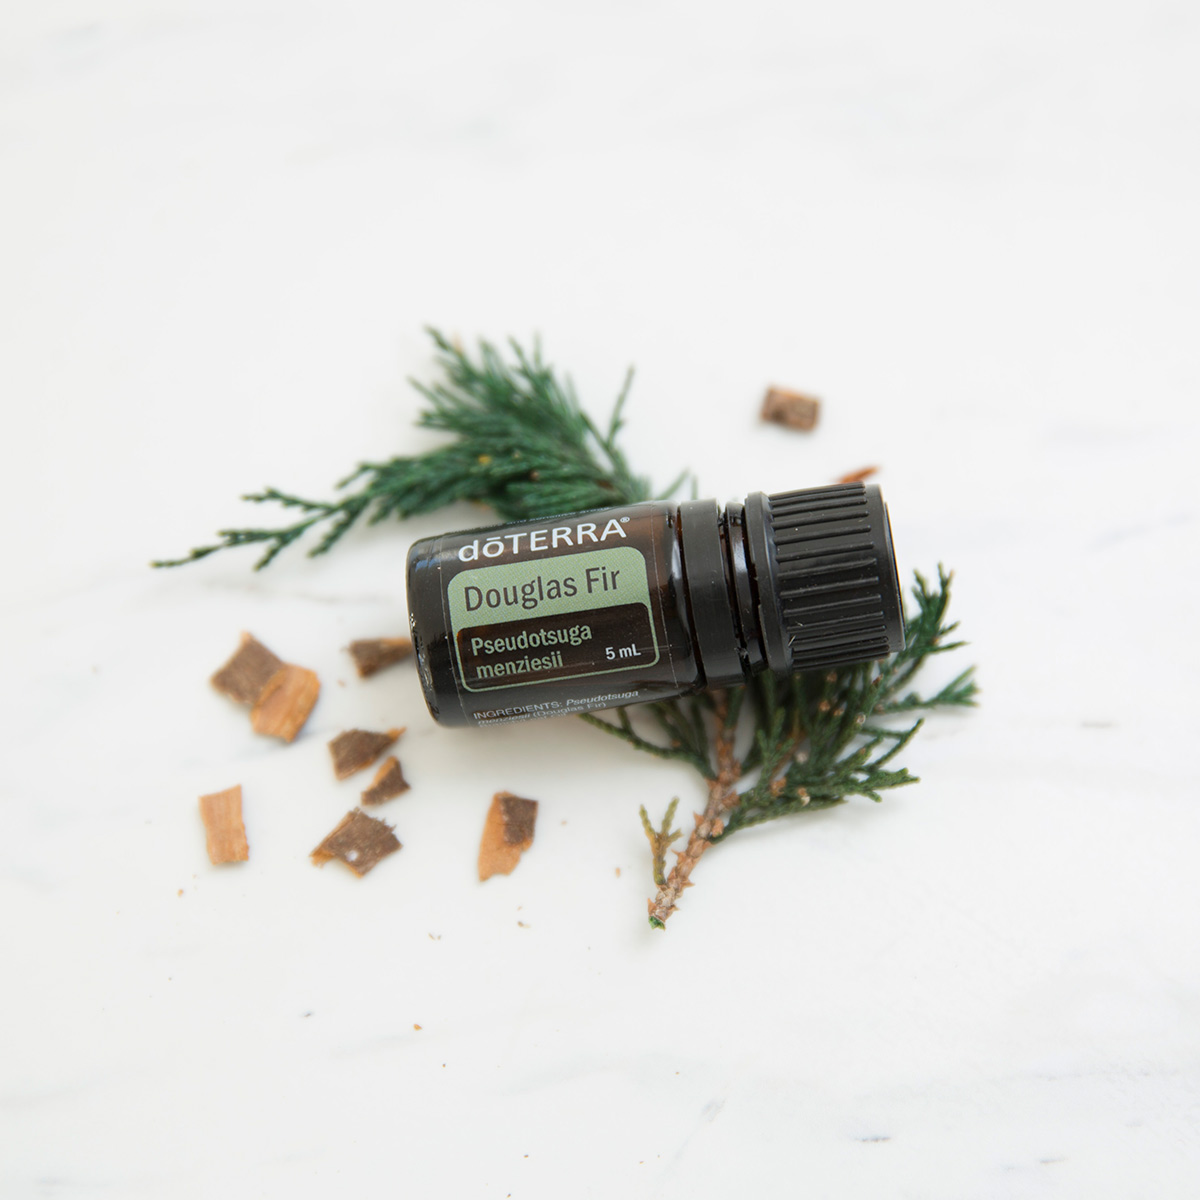 Bottle of Douglas Fir essential oil, fir branch, small pieces of wood. What are the benefits of Douglas Fir essential oil? Douglas Fir oil is good for the skin, creates an uplifting atmosphere, and can help to purify the air.